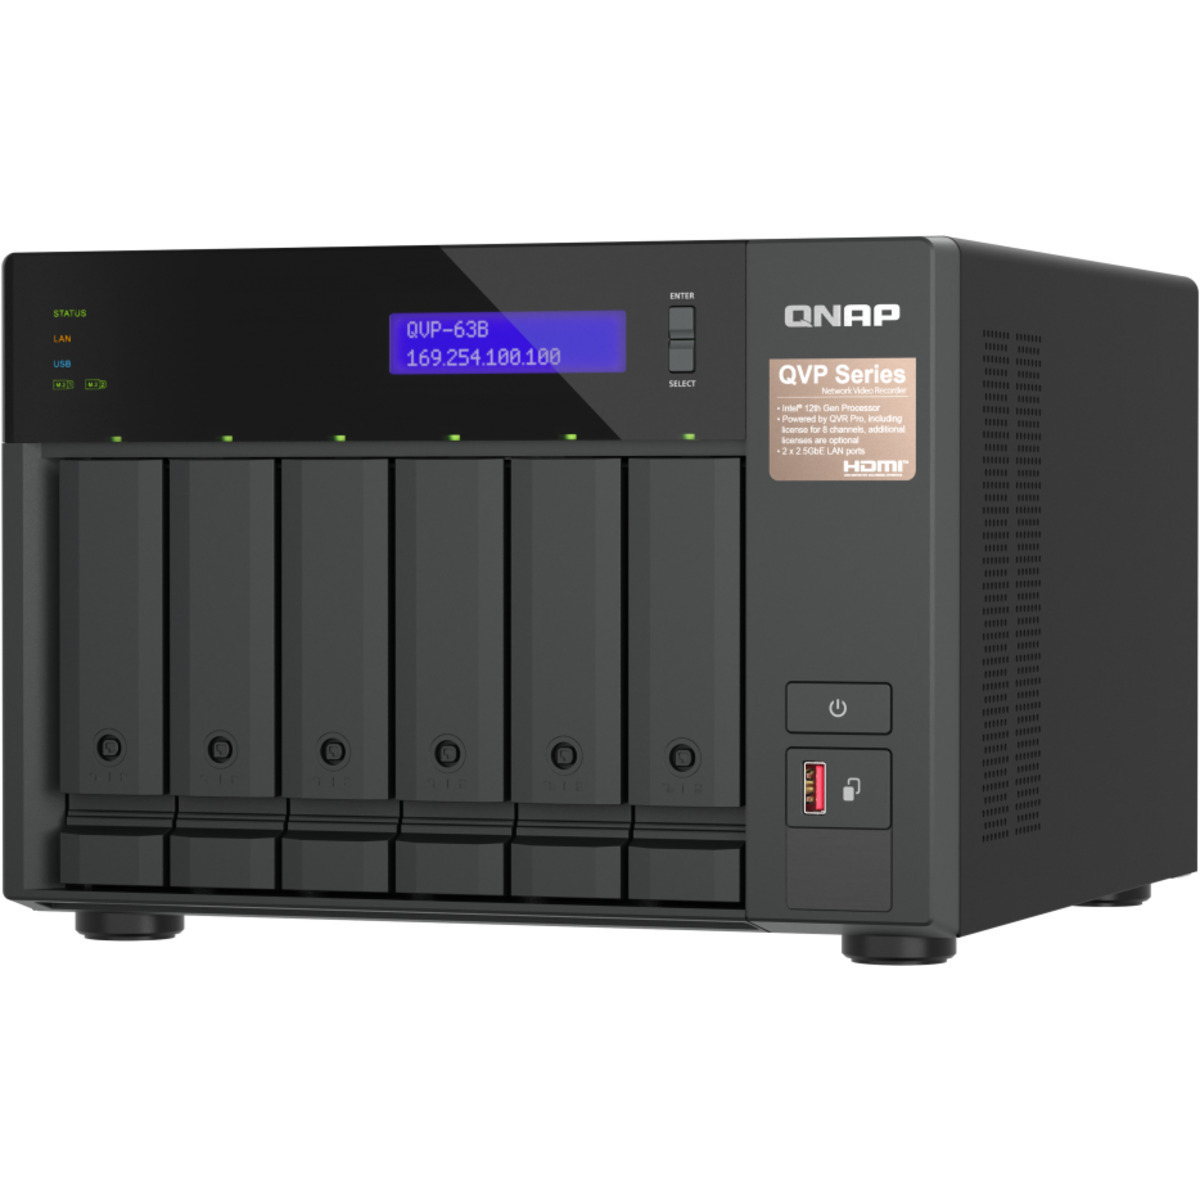 buy $2960 QNAP QVP-63B 12tb Desktop NVR - Network Video Recorder 6x2000gb Seagate IronWolf Pro ST2000NT001 3.5 7200rpm SATA 6Gb/s HDD NAS Class Drives Installed - Burn-In Tested - nas headquarters buy network attached storage server device das new raid-5 free shipping simply usa QVP-63B